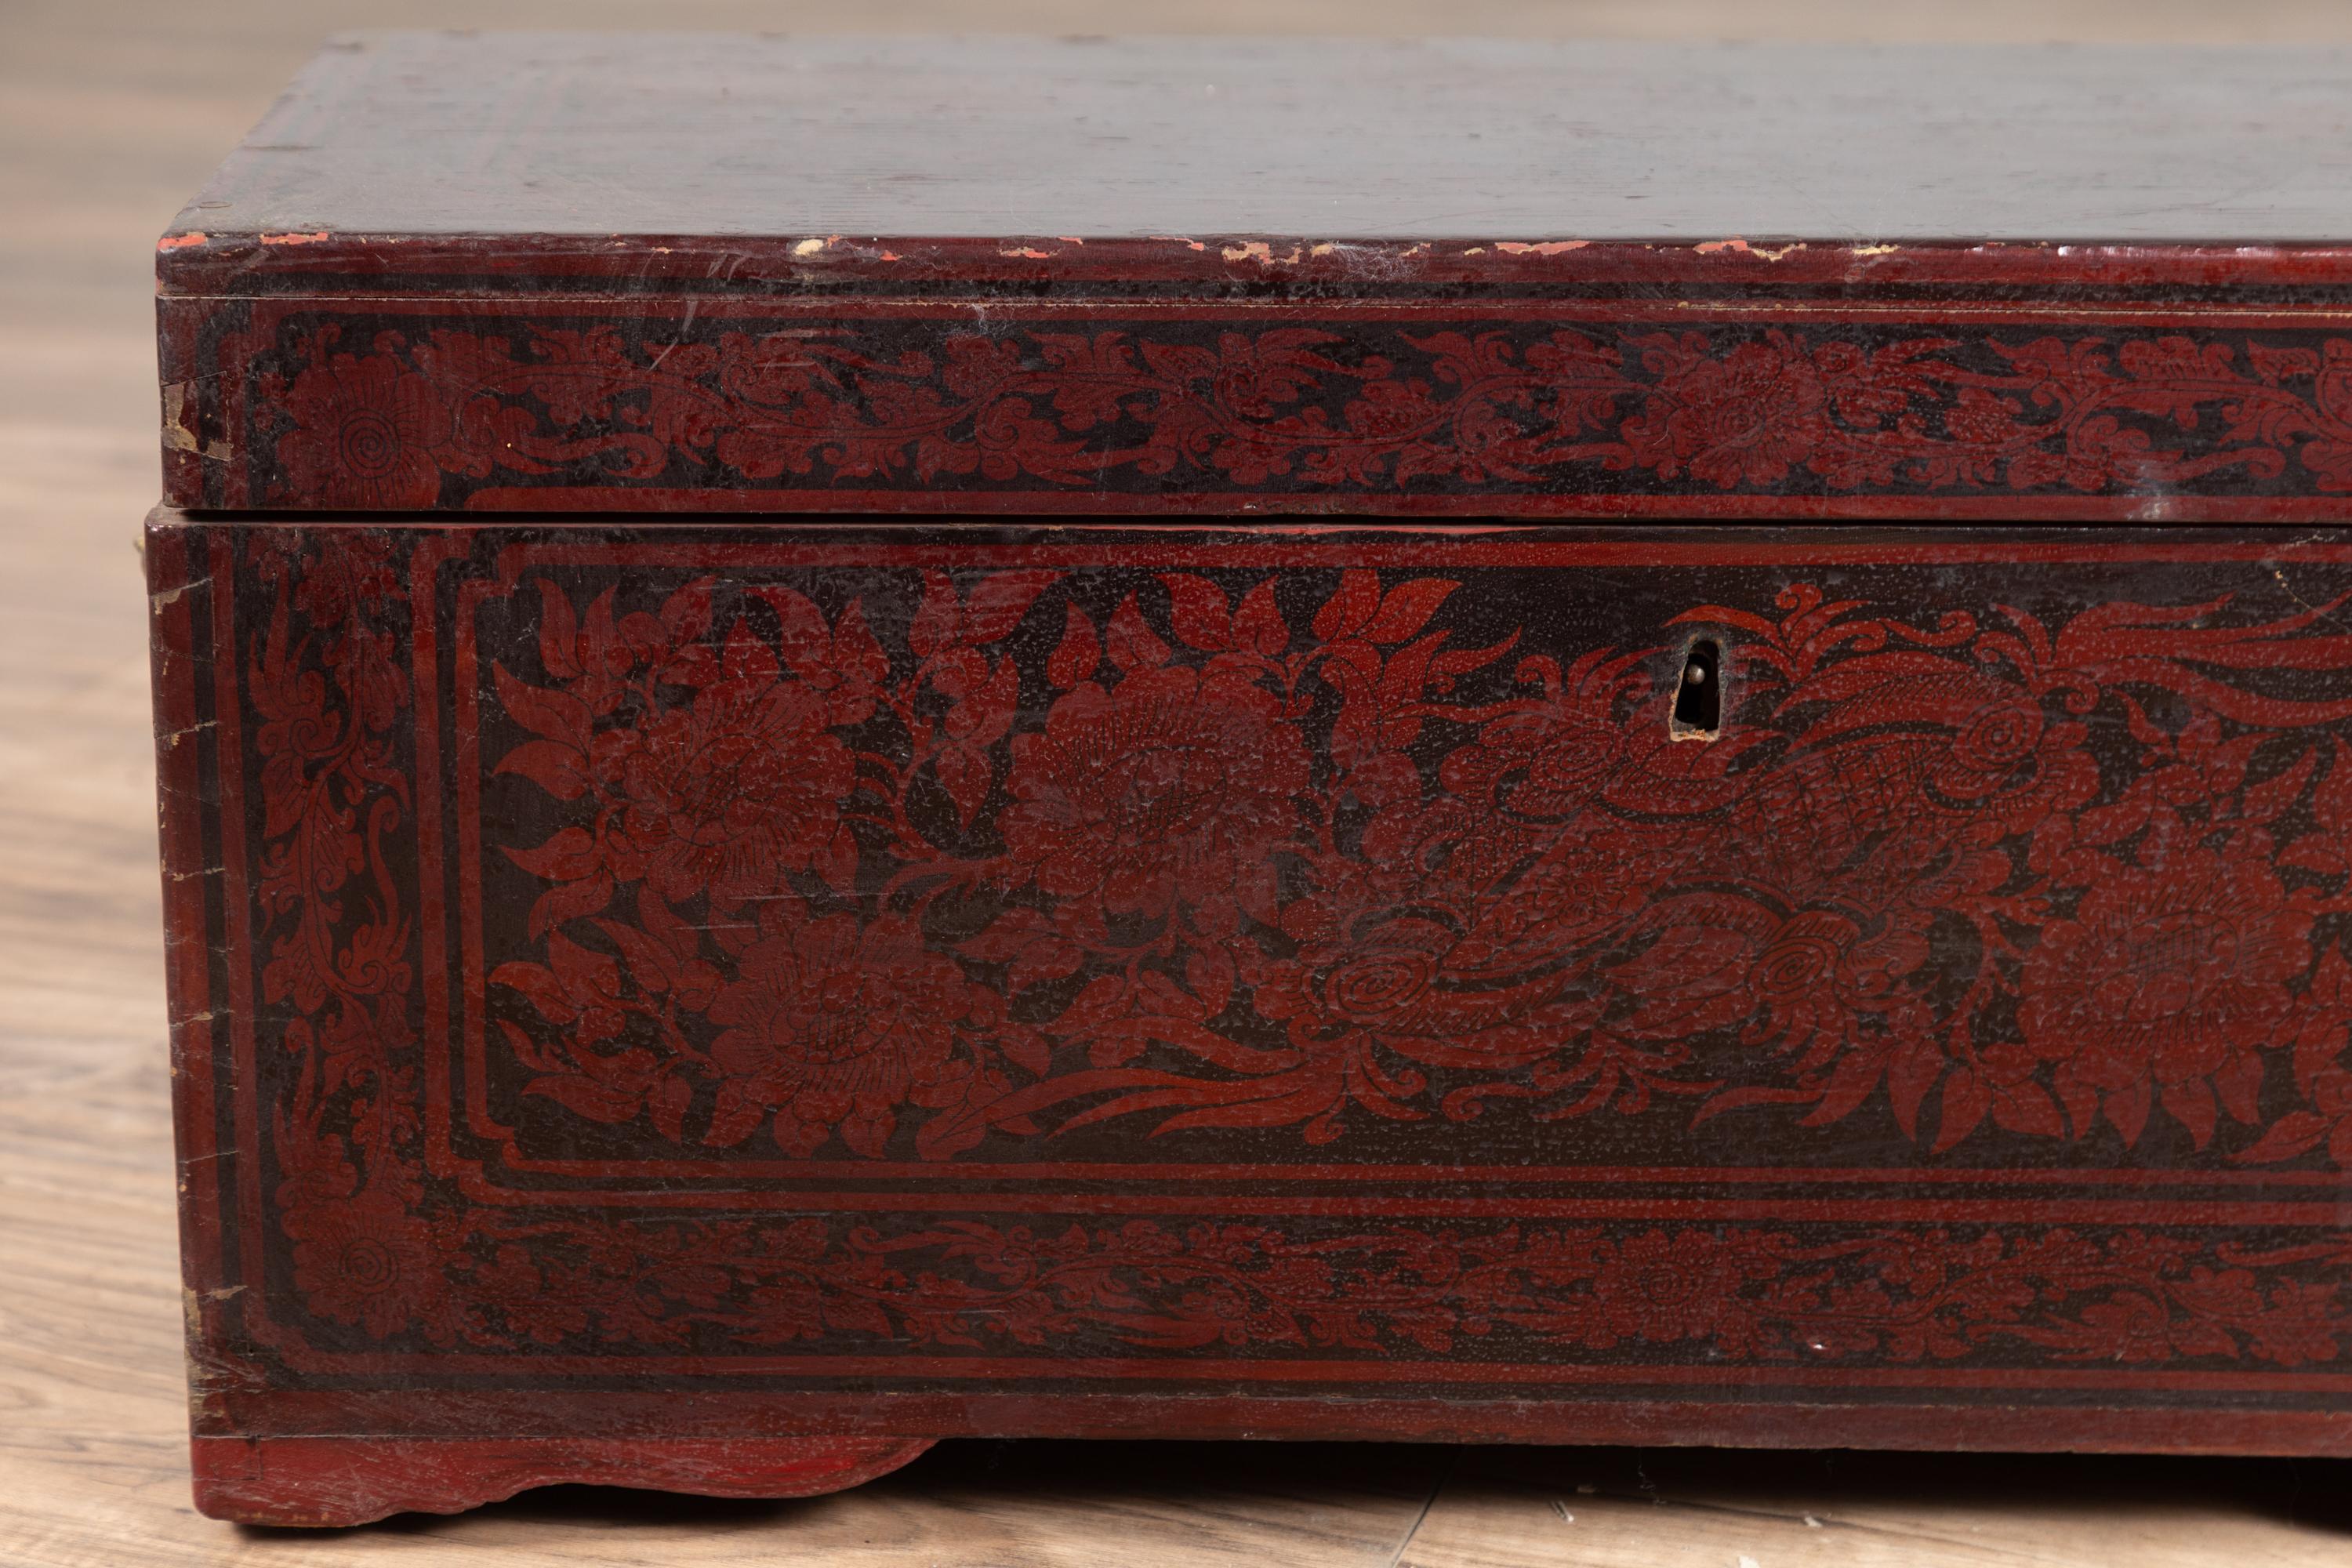 Vintage Lacquered Leather Chest with Burgundy Patina from Palembang, Sumatra 1